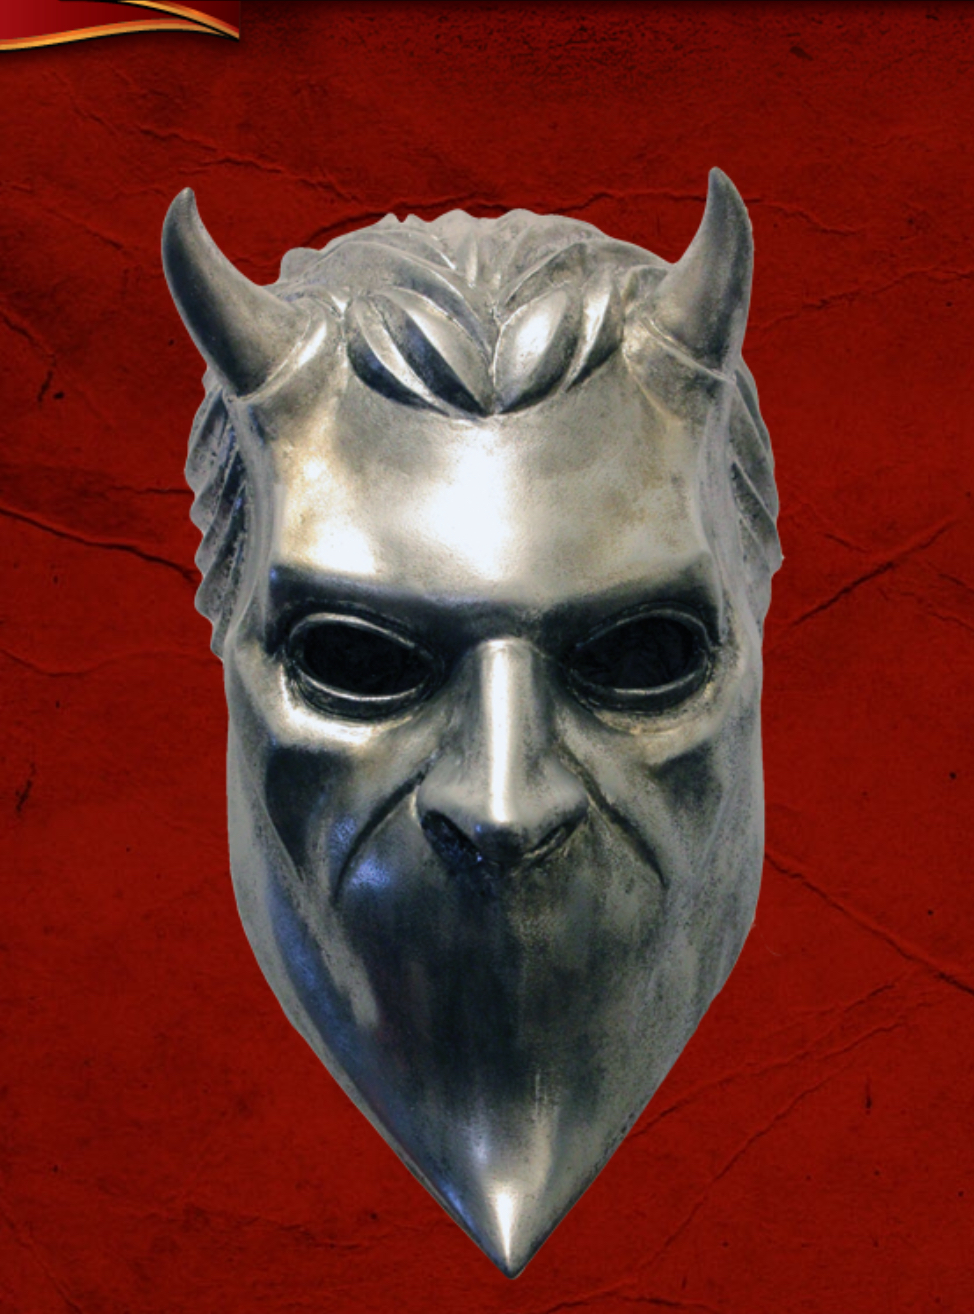 GHOST - NAMELESS GHOULS MASK